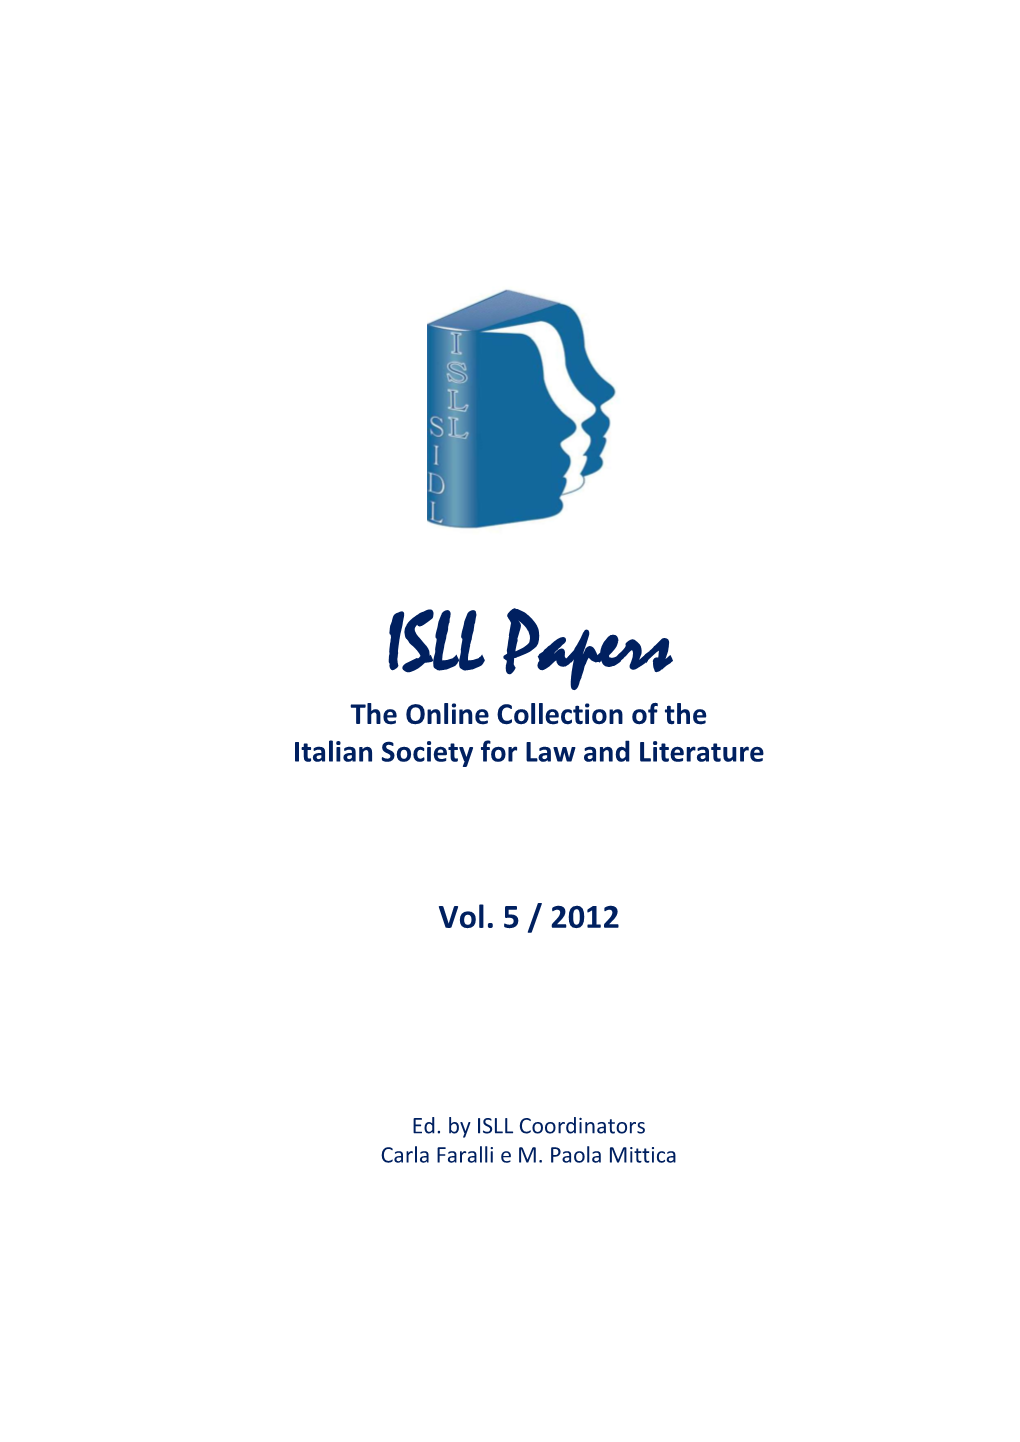 ISLL Papers the Online Collection of the Italian Society for Law and Literature